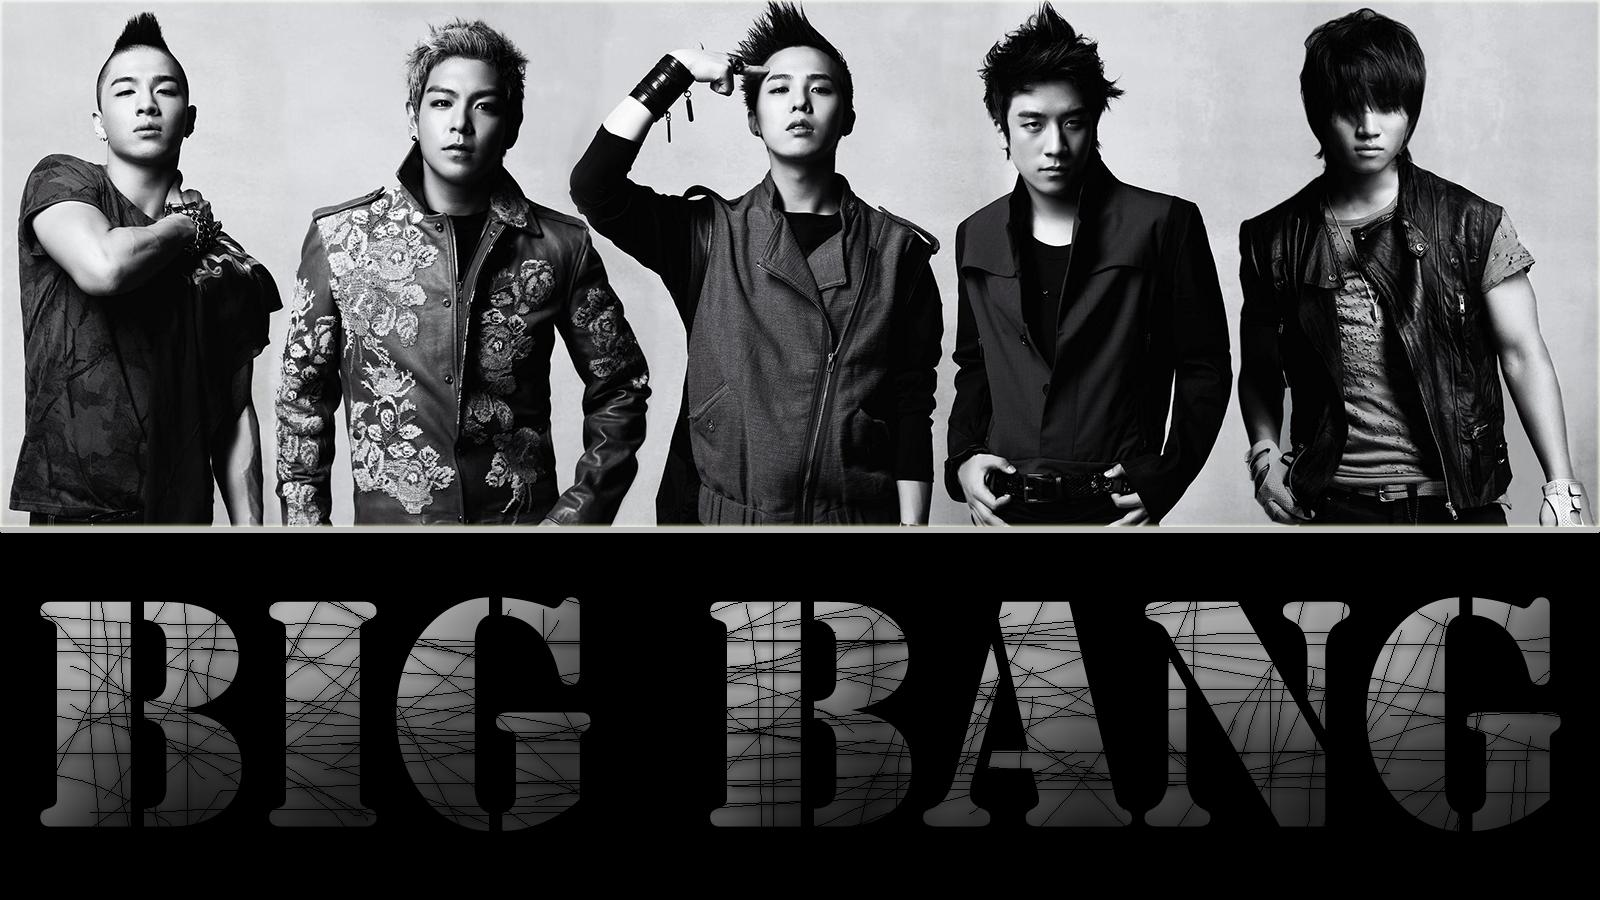 kpop wallpaper,social group,font,photography,album cover,black and white